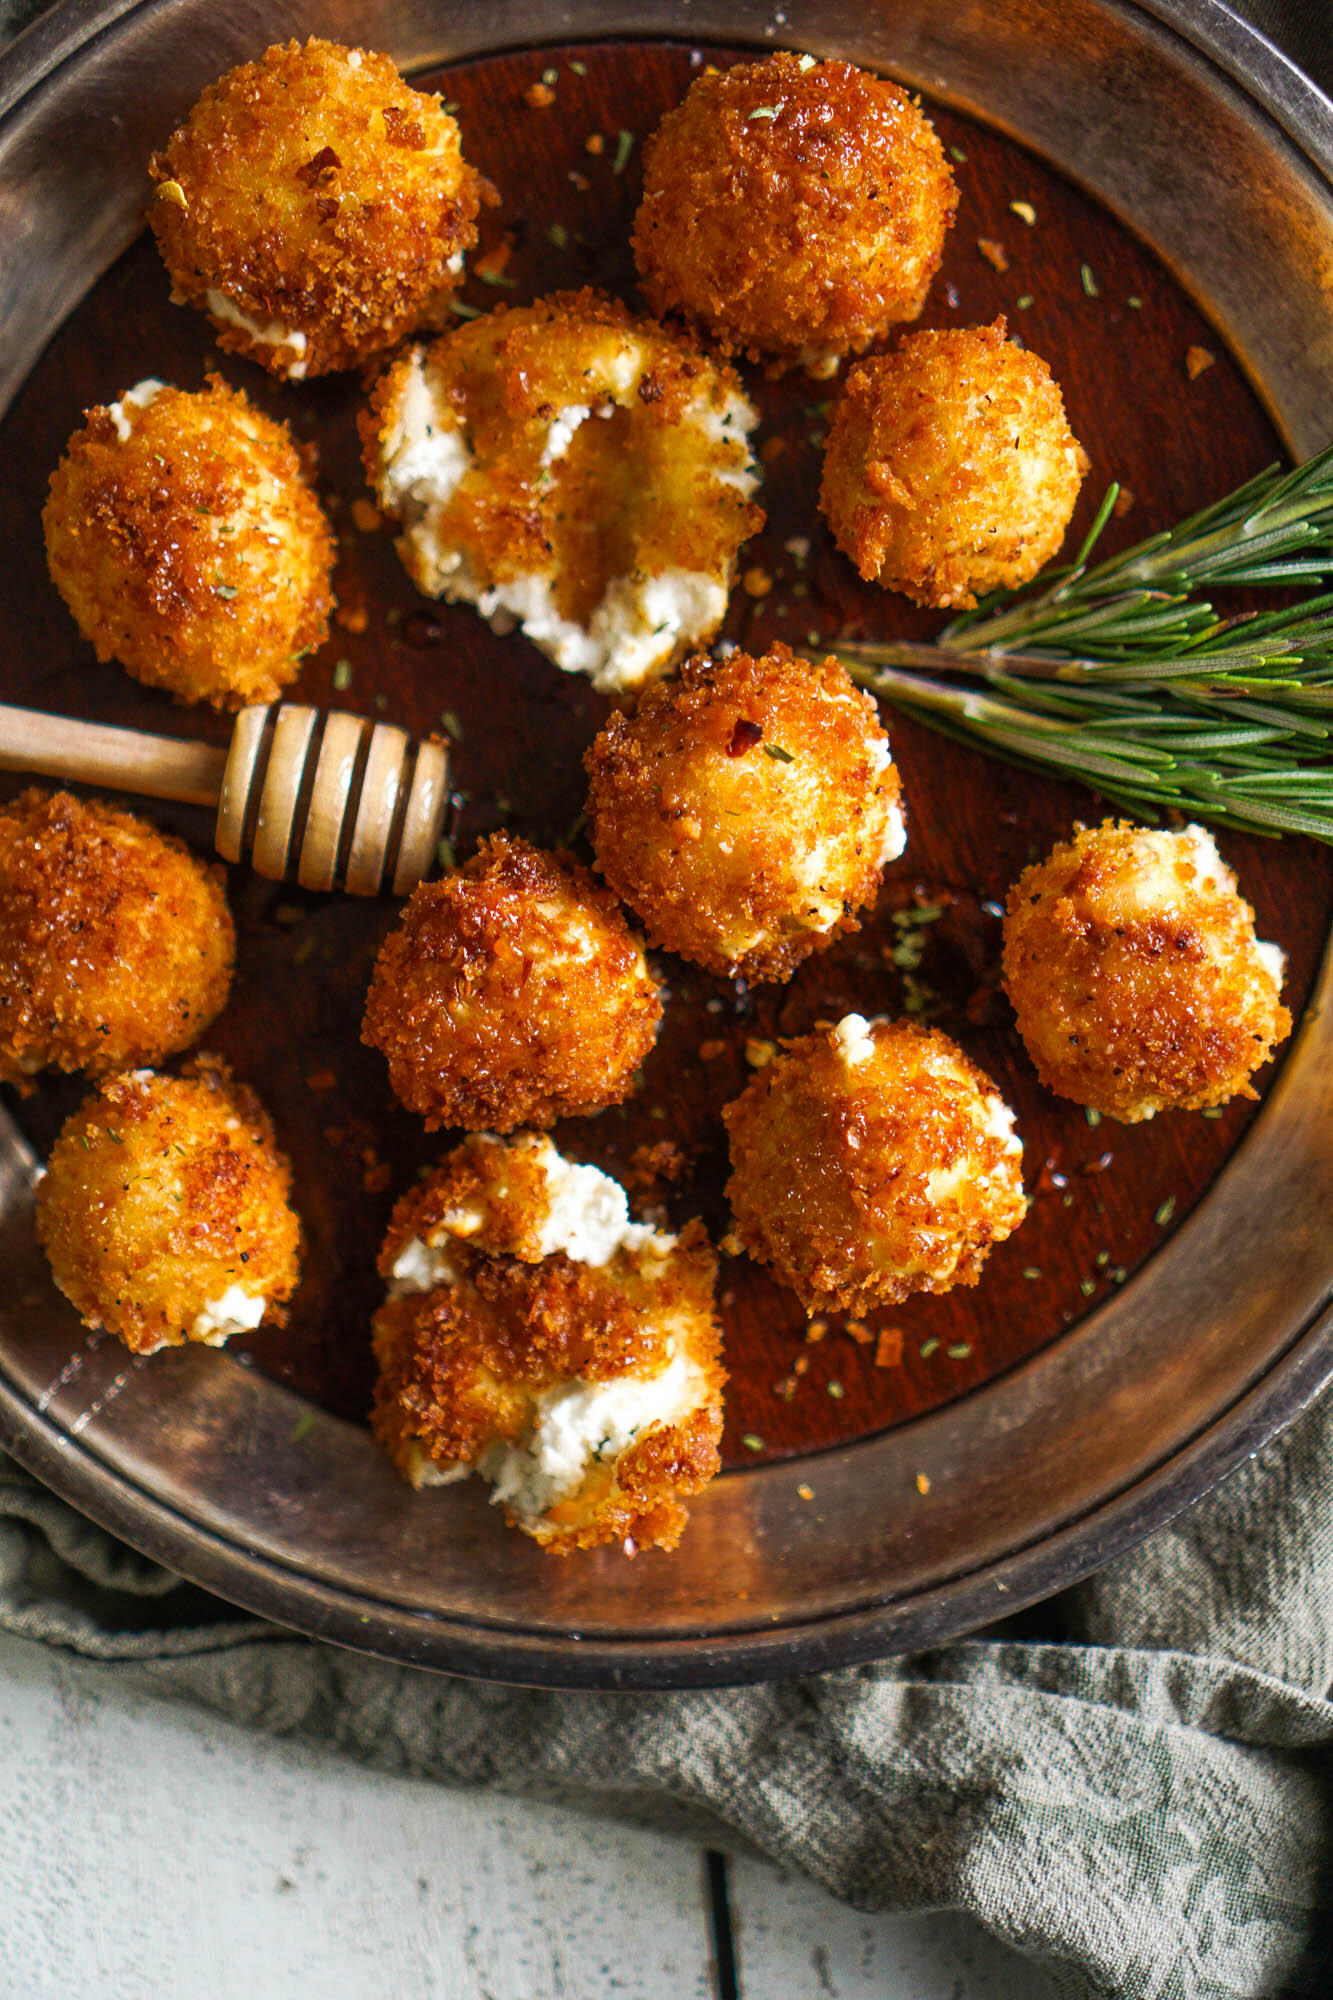 Fried Goat Cheese With Tarragon &amp; Honey